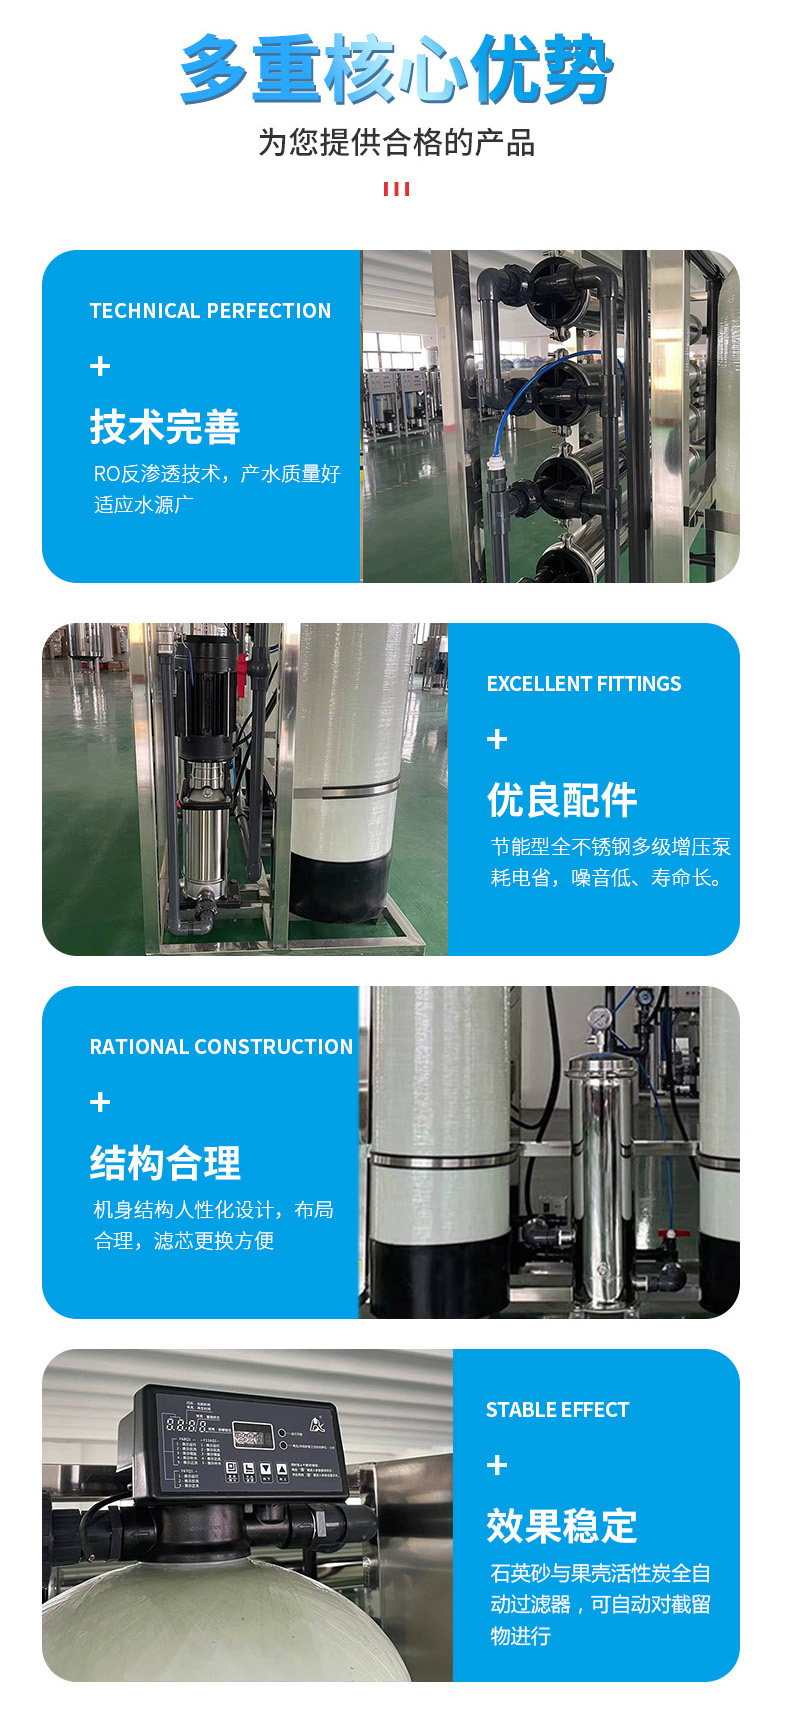 Industrial boiler softened water treatment equipment Large rural well water filtration equipment Commercial reverse osmosis water purification equipment